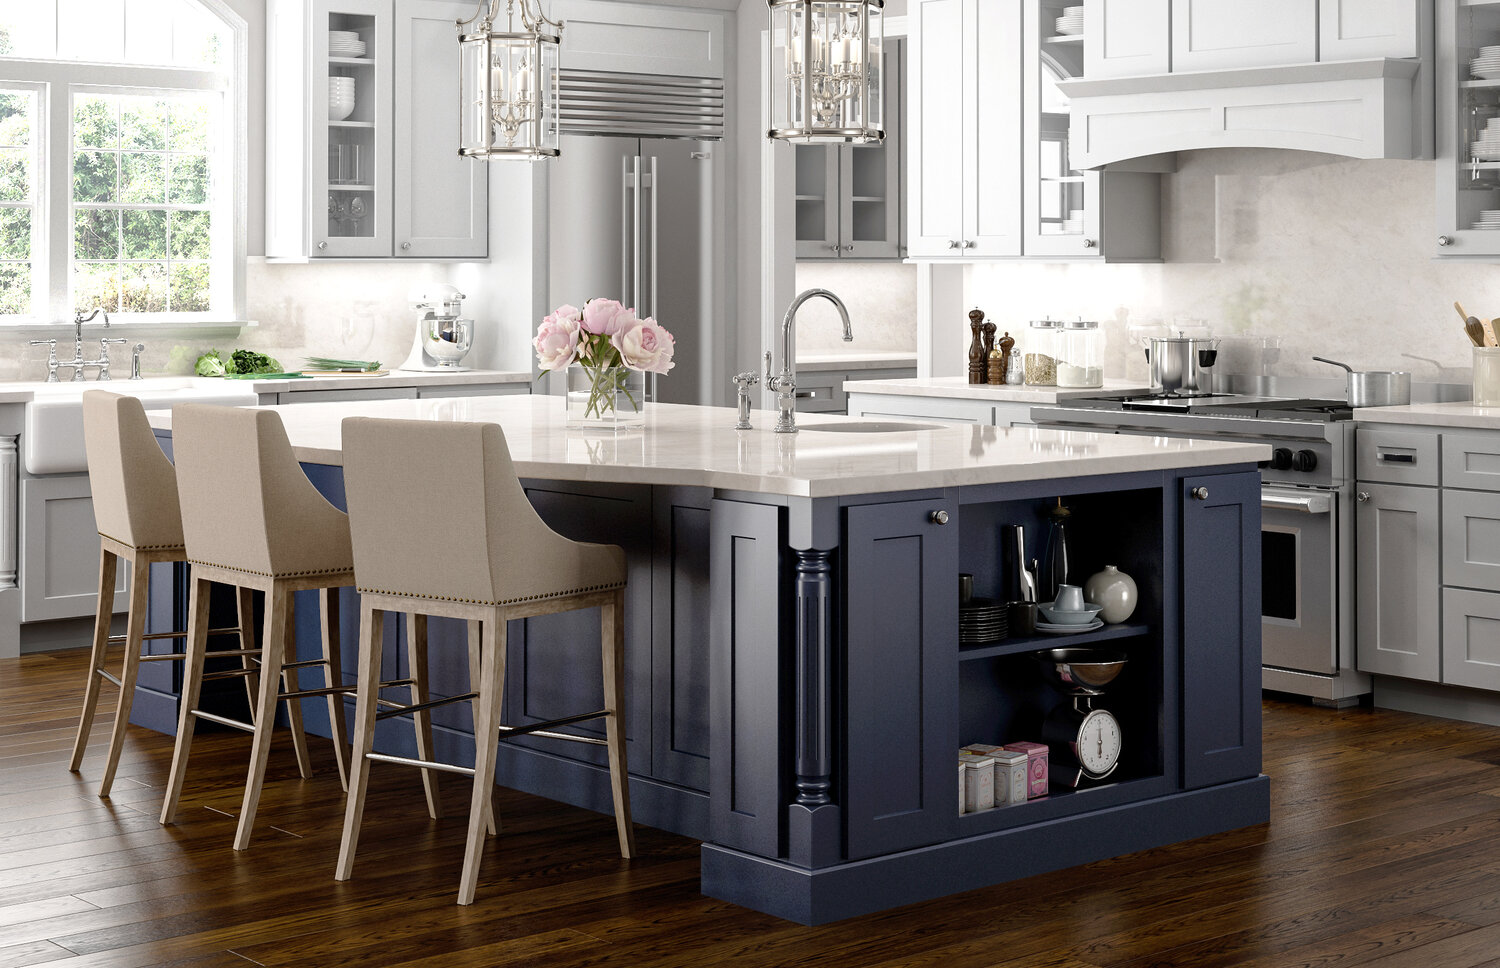 Budget Friendly Kitchen & Bath Cabinets Throughout Your Home